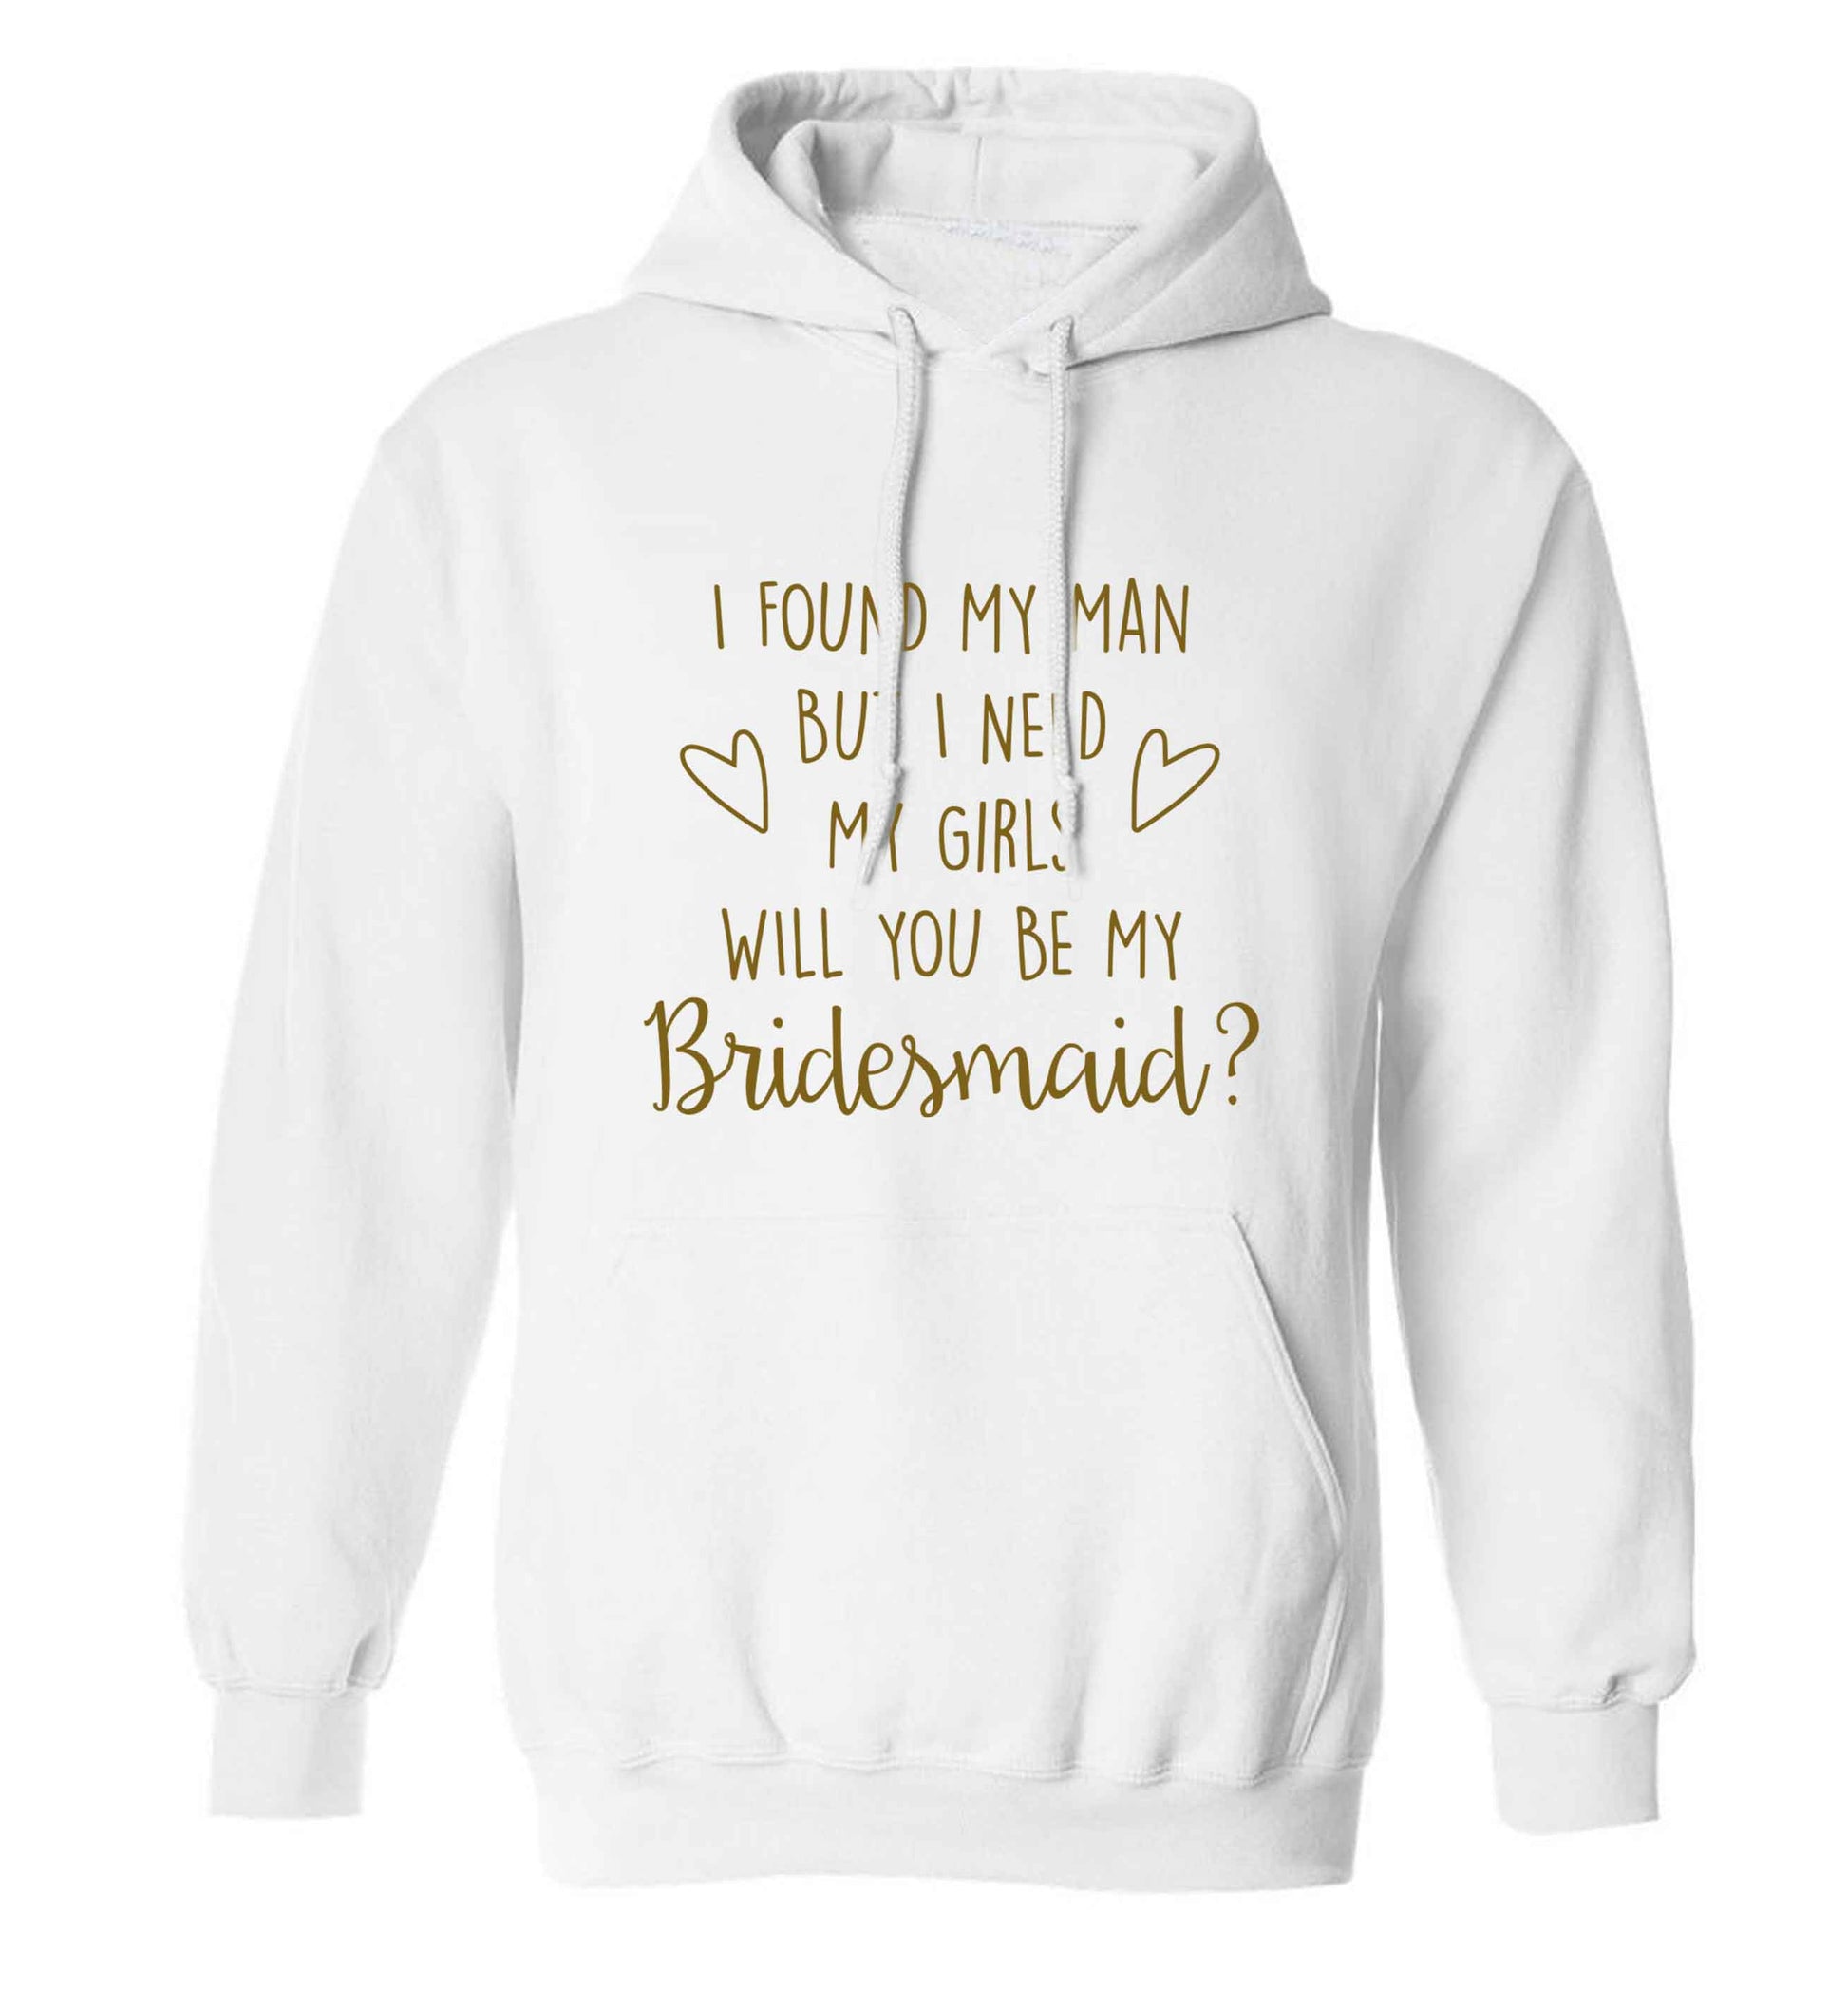 I found my man but I need my girls will you be my bridesmaid? adults unisex white hoodie 2XL